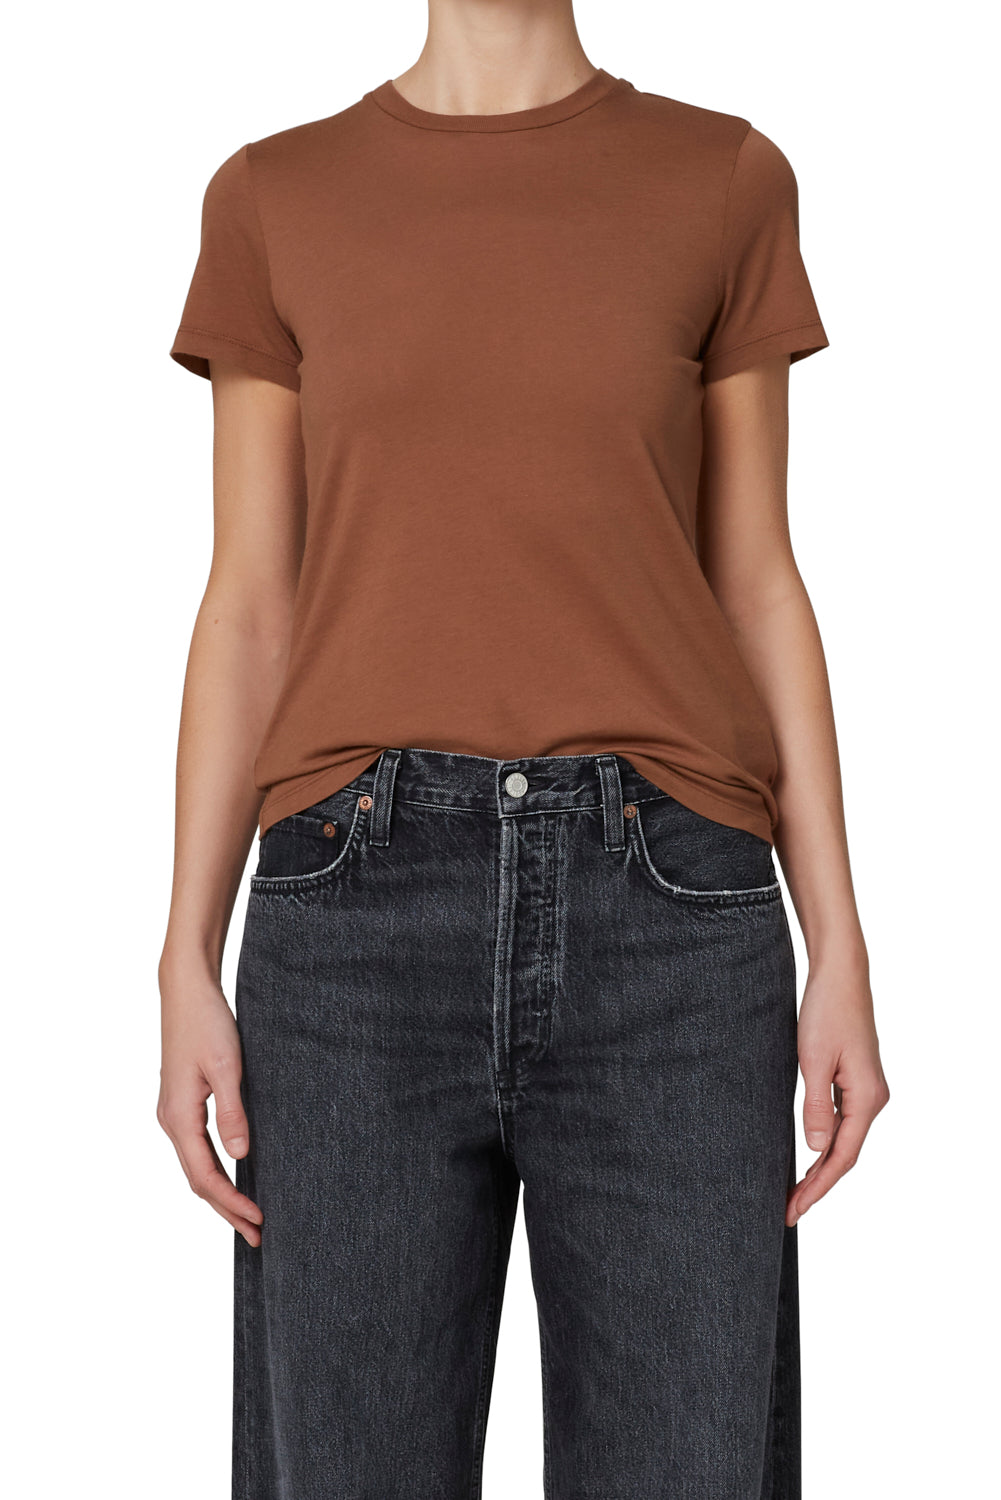 AGOLDE - Annise Slim Tee in Beeswax